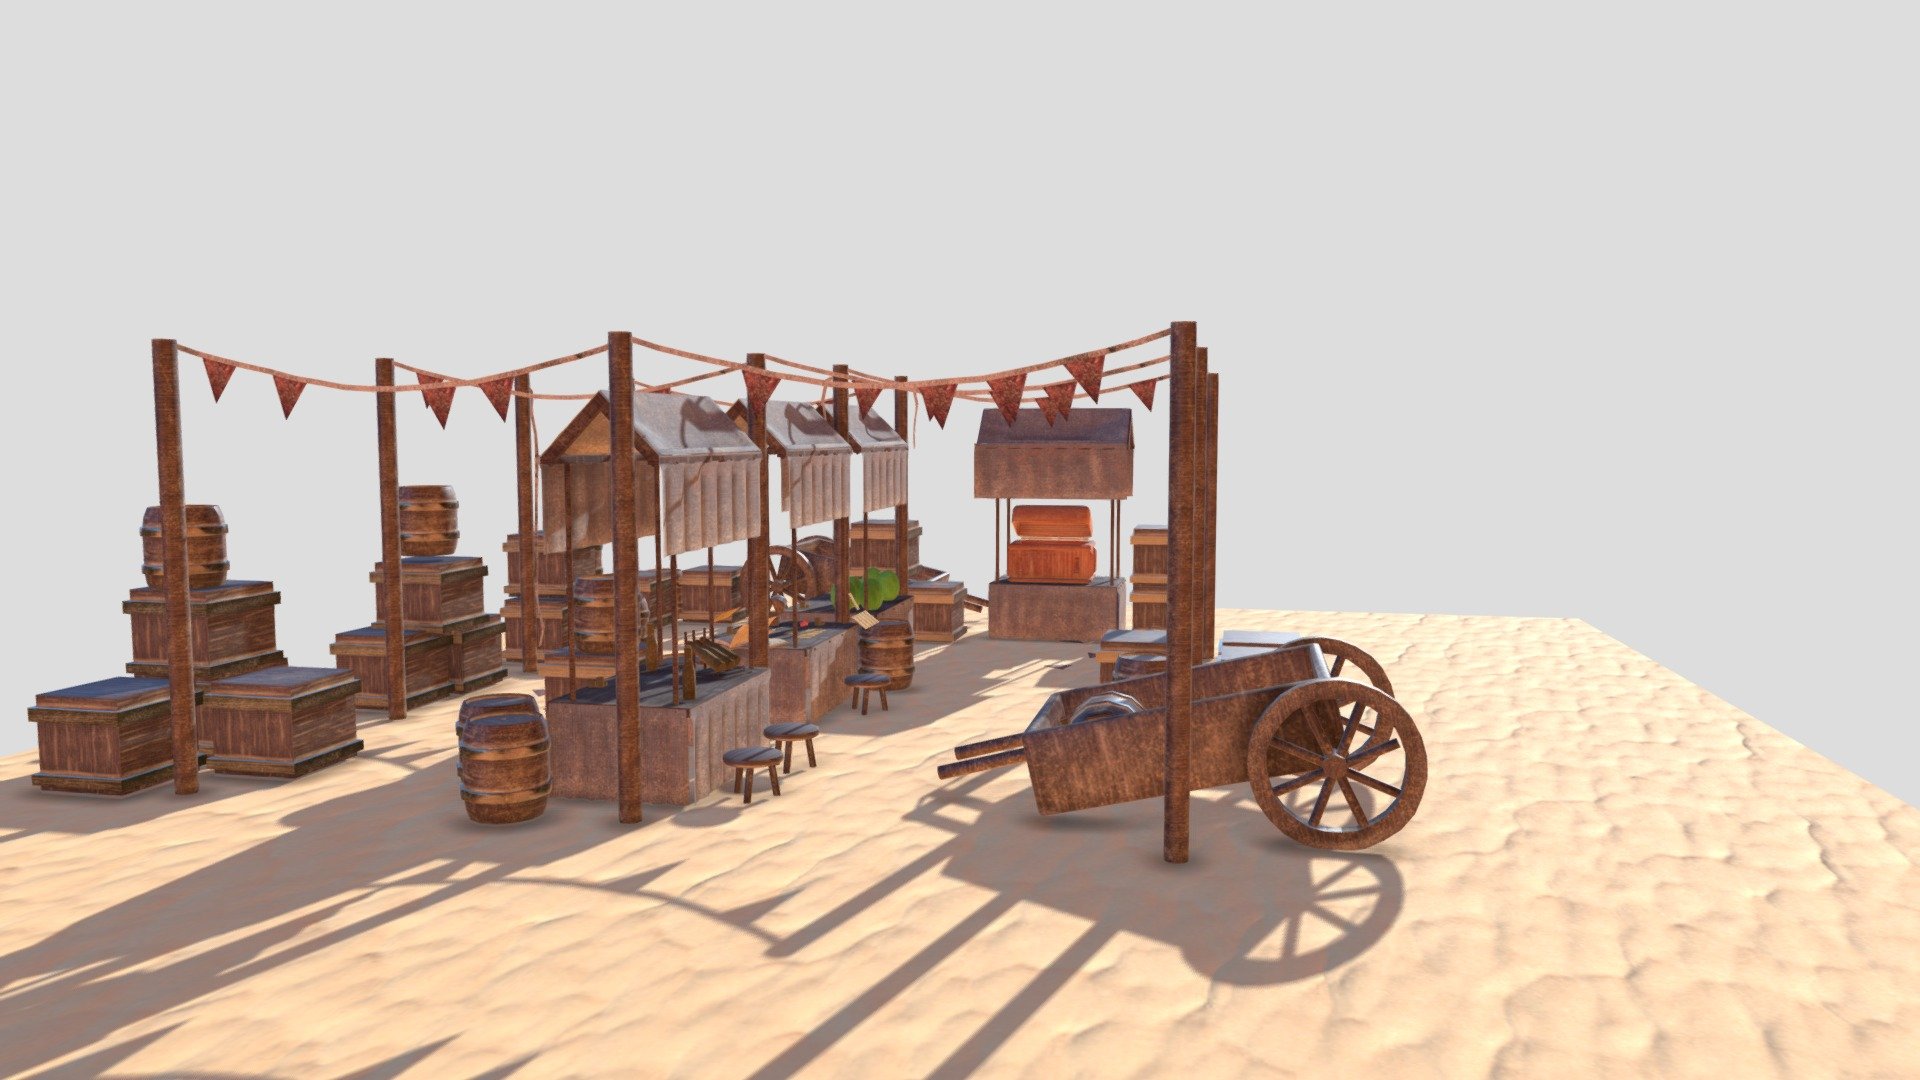 A scene based on a Arabian market place. The hidden tresure is the chest at the end of the market for sale 3d model